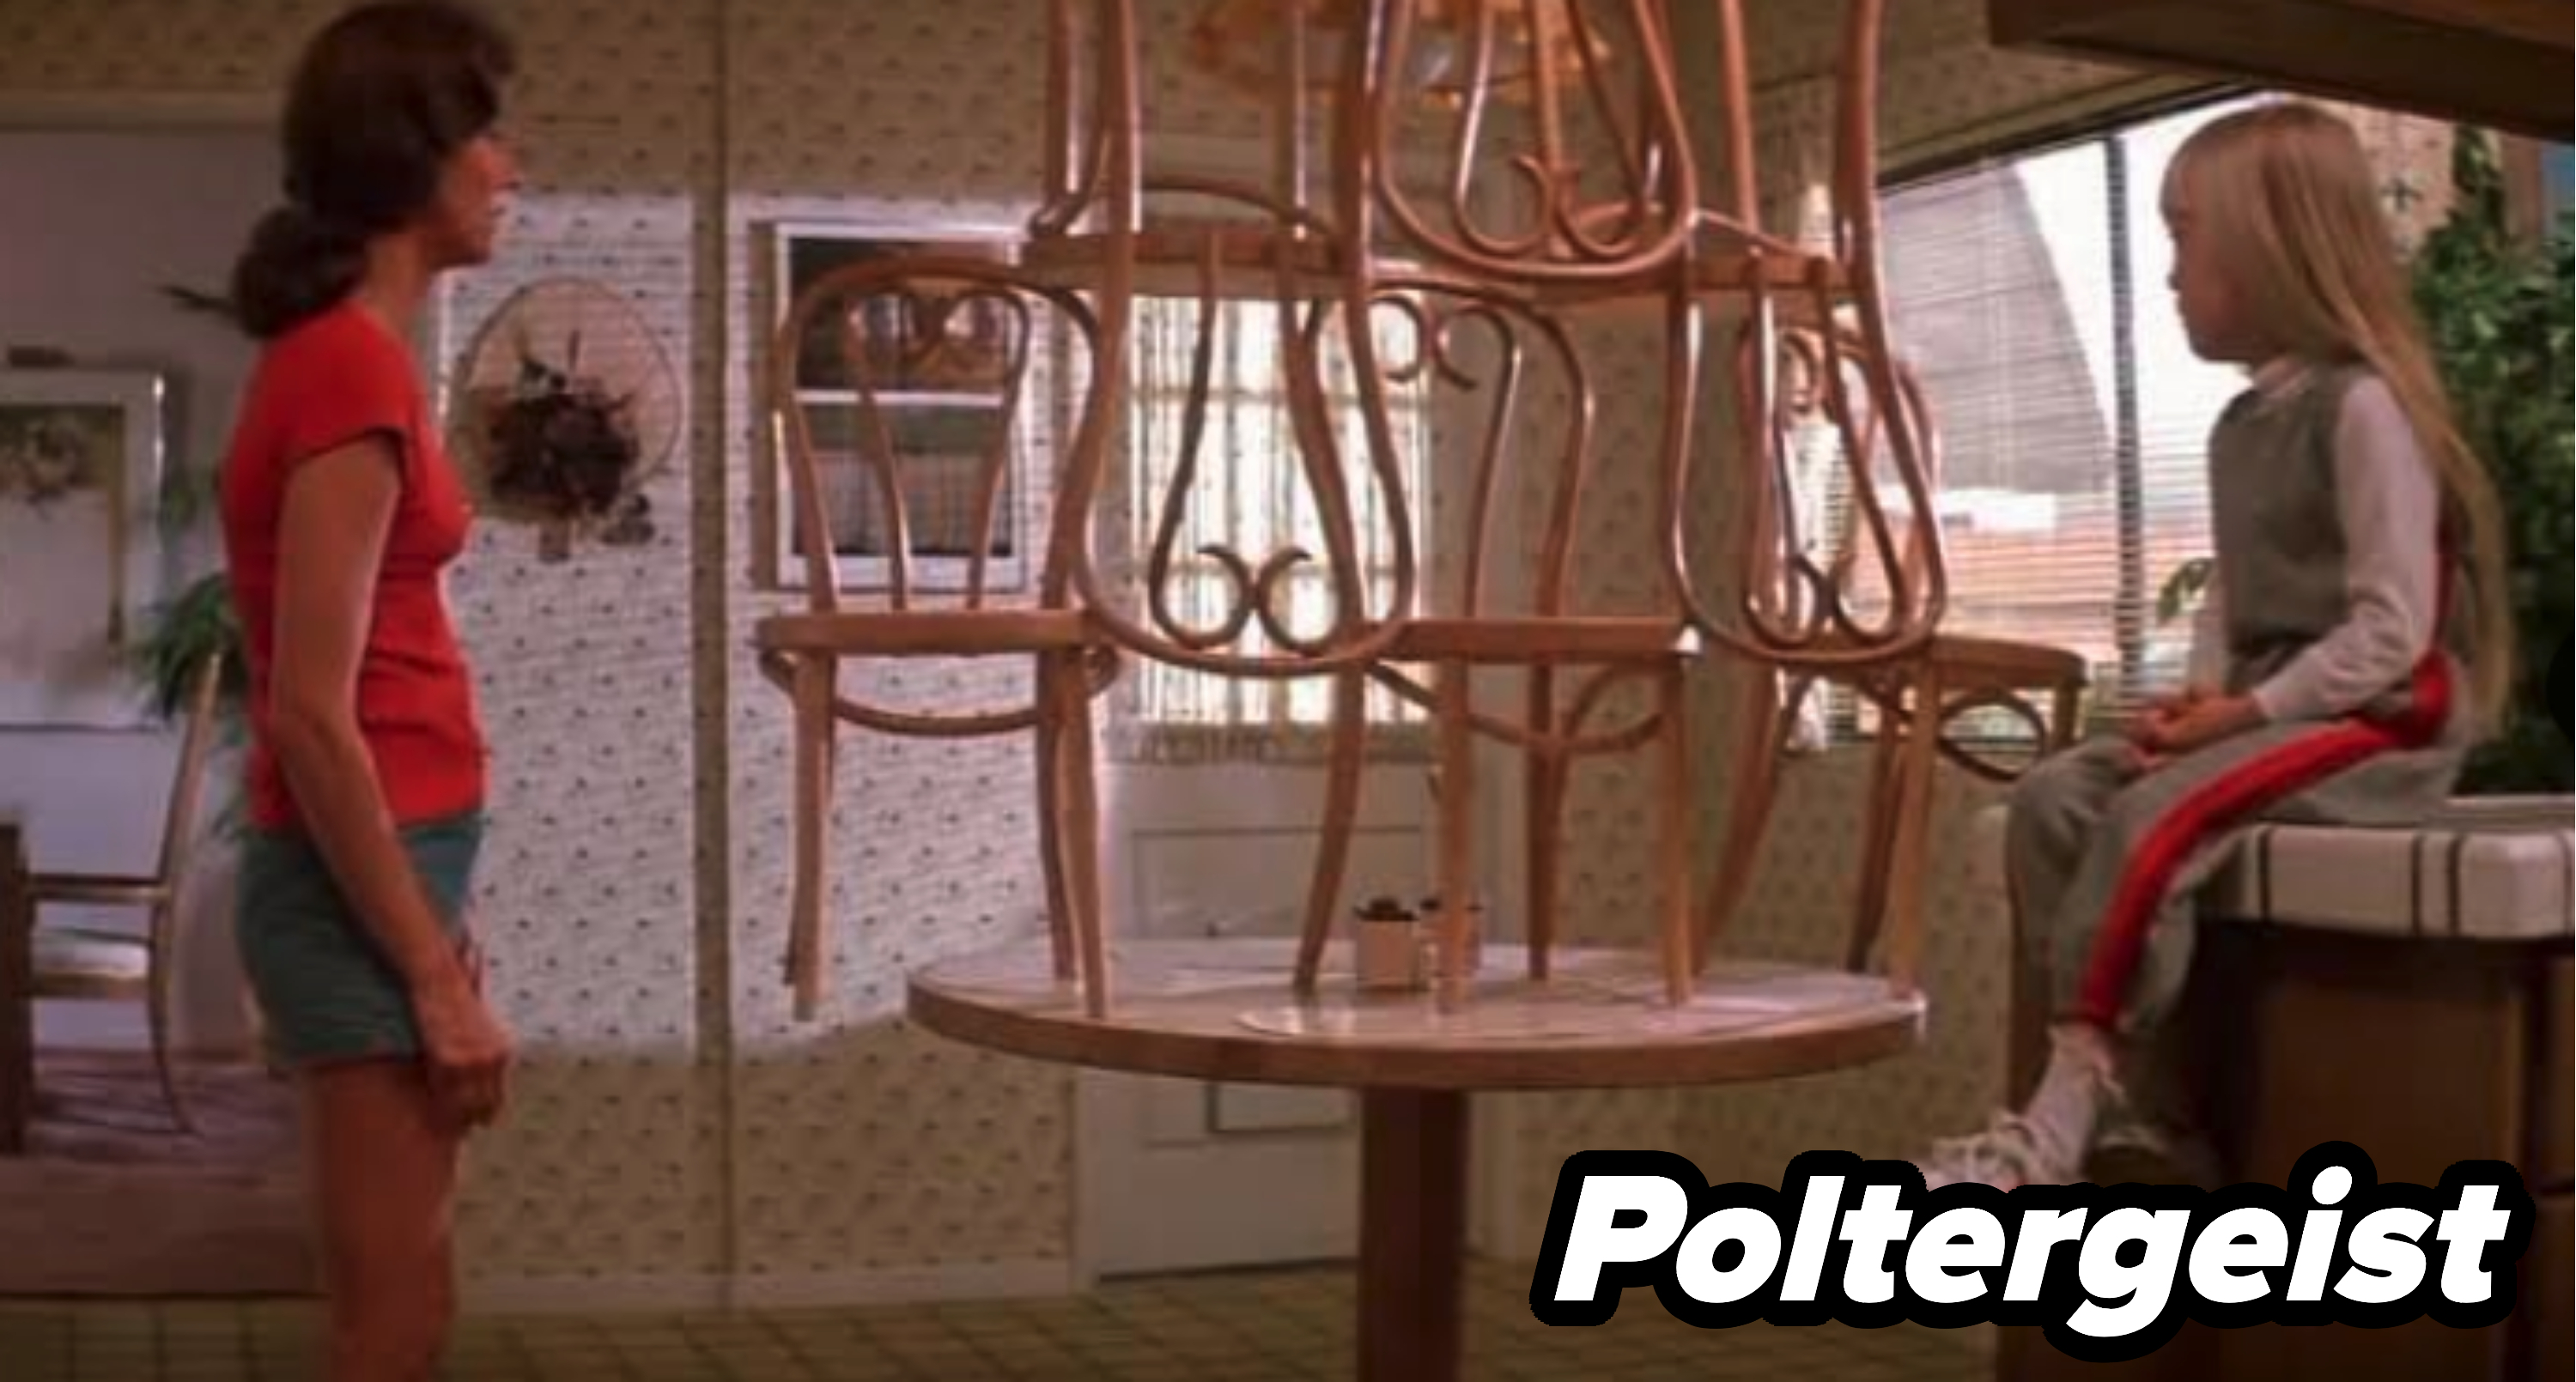 Poltergeist scene with chairs on a table